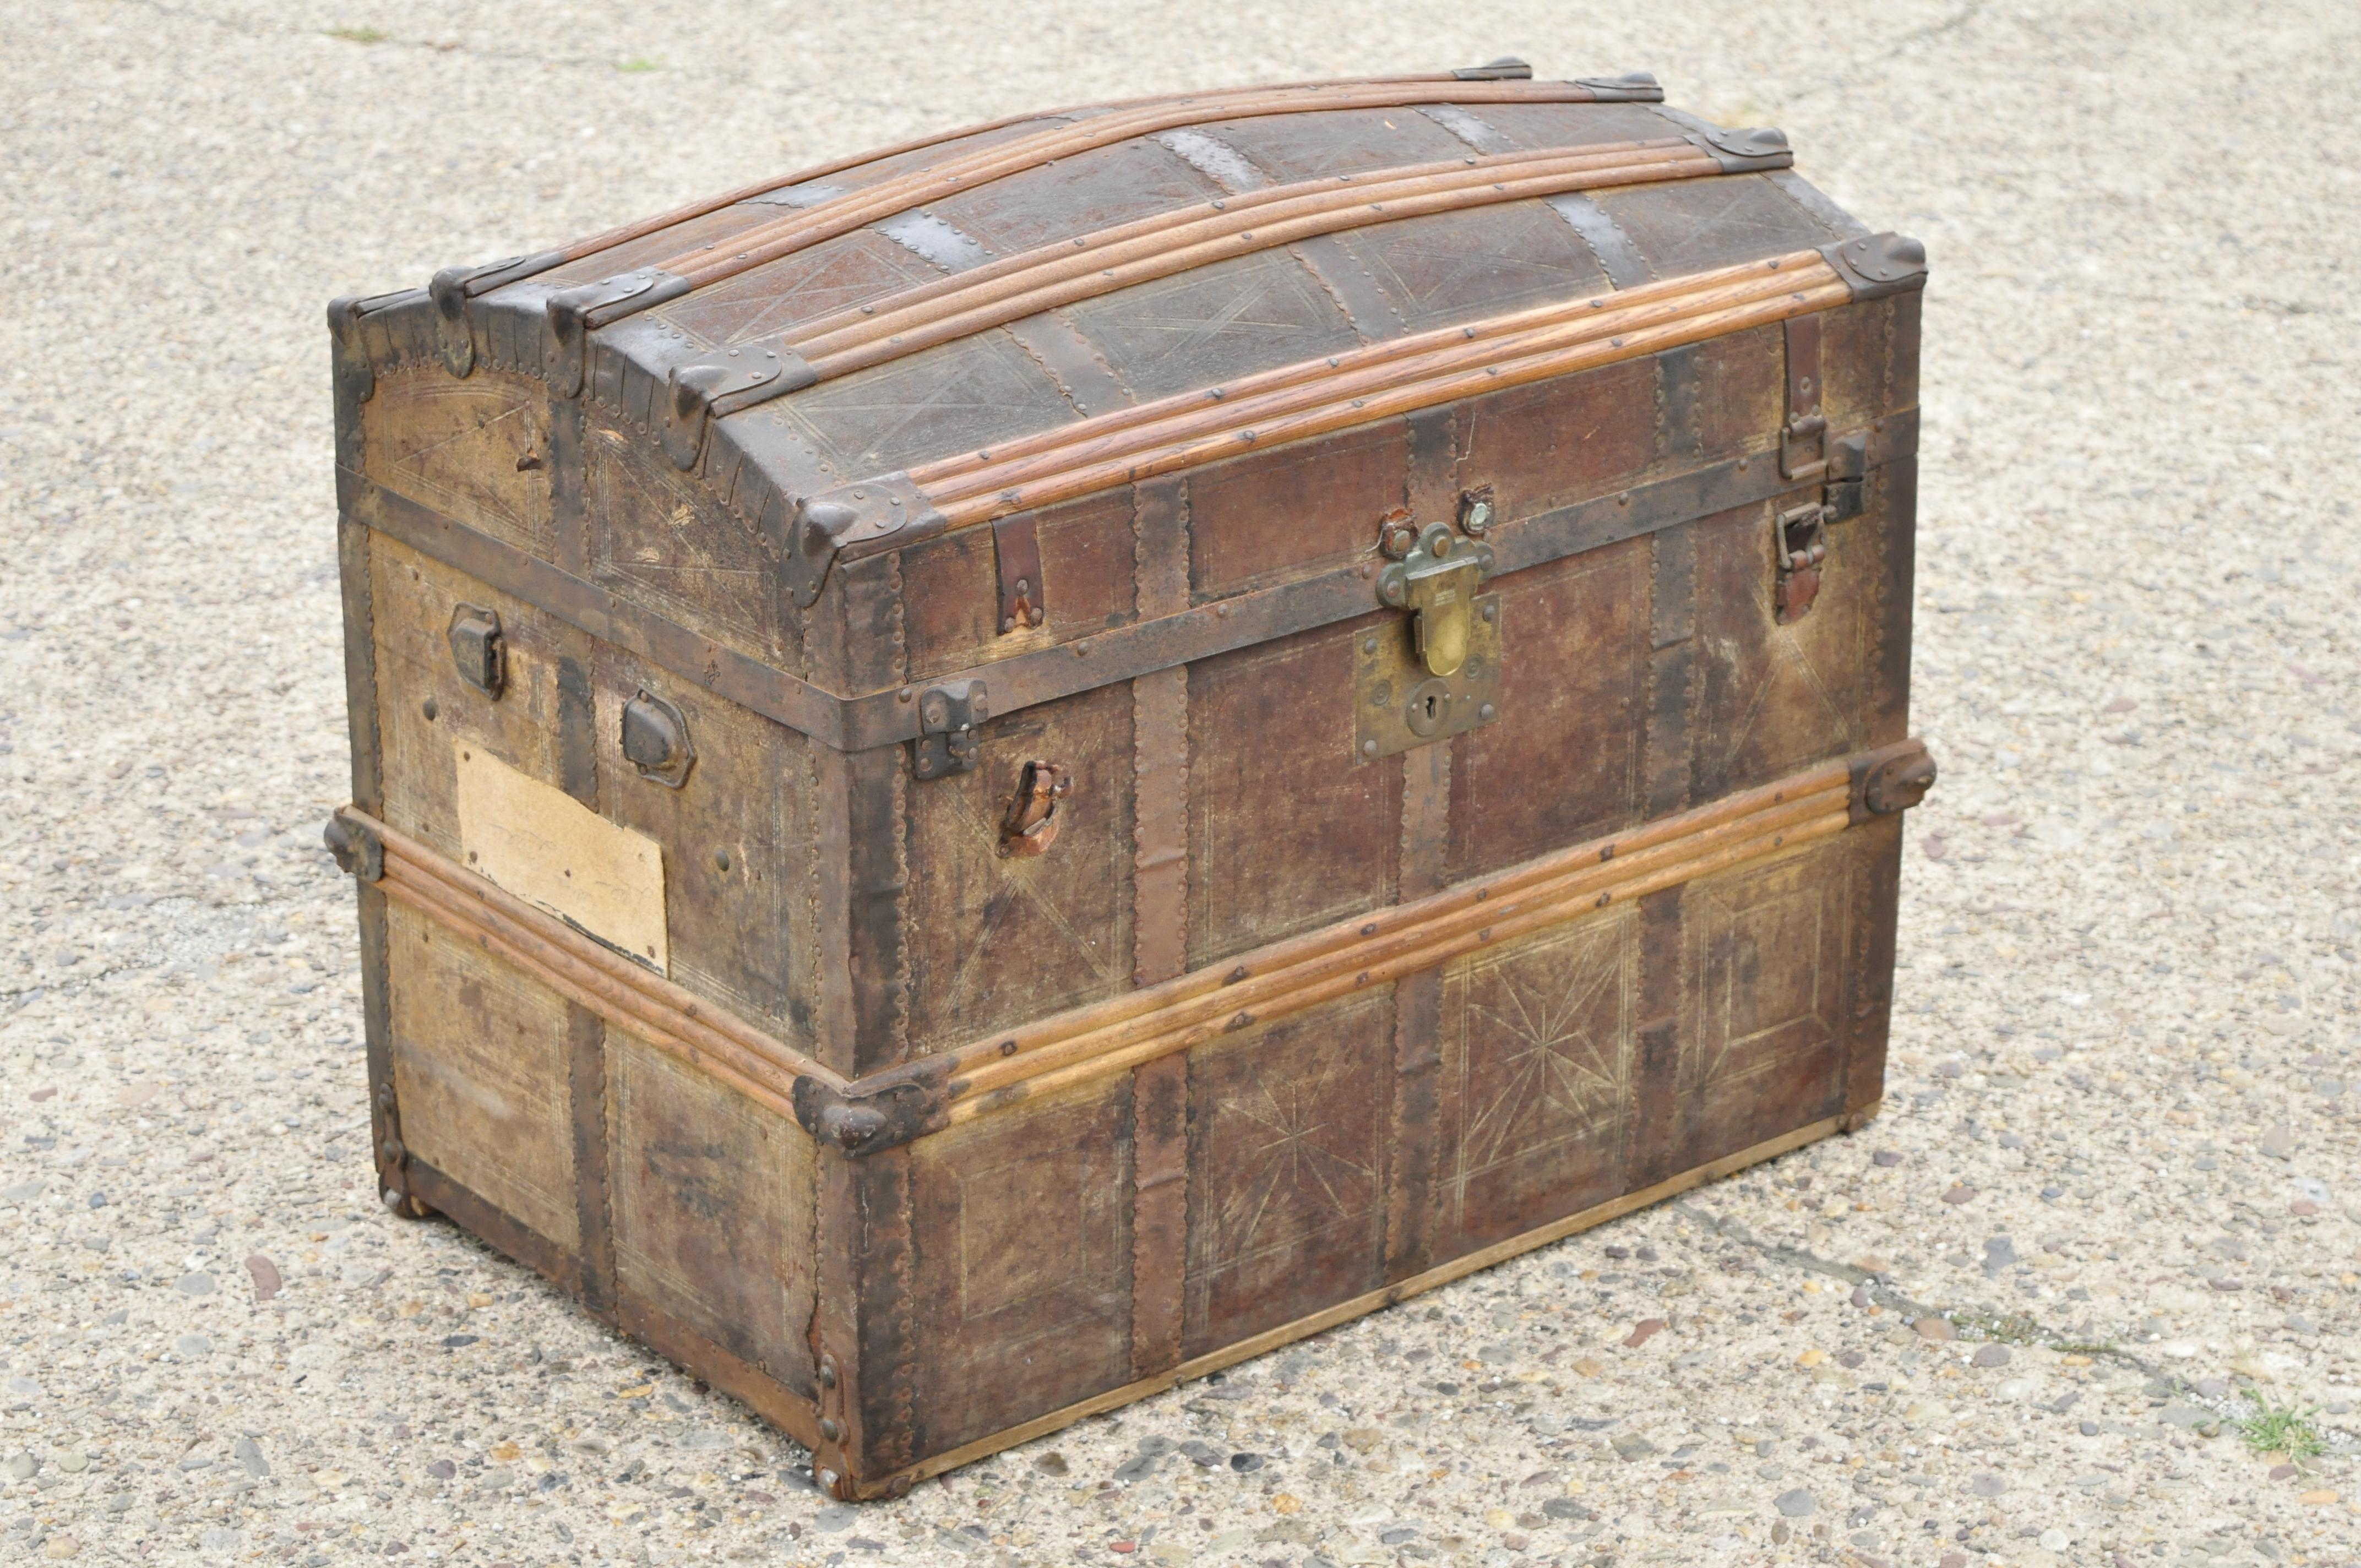 Antique dome top wood leather metal distressed pirates treasure chest trunk. Item features rolling casters, oak wood bands, fitted interior, embossed leather case, very nice antique item, quality craftsmanship, great style and form.